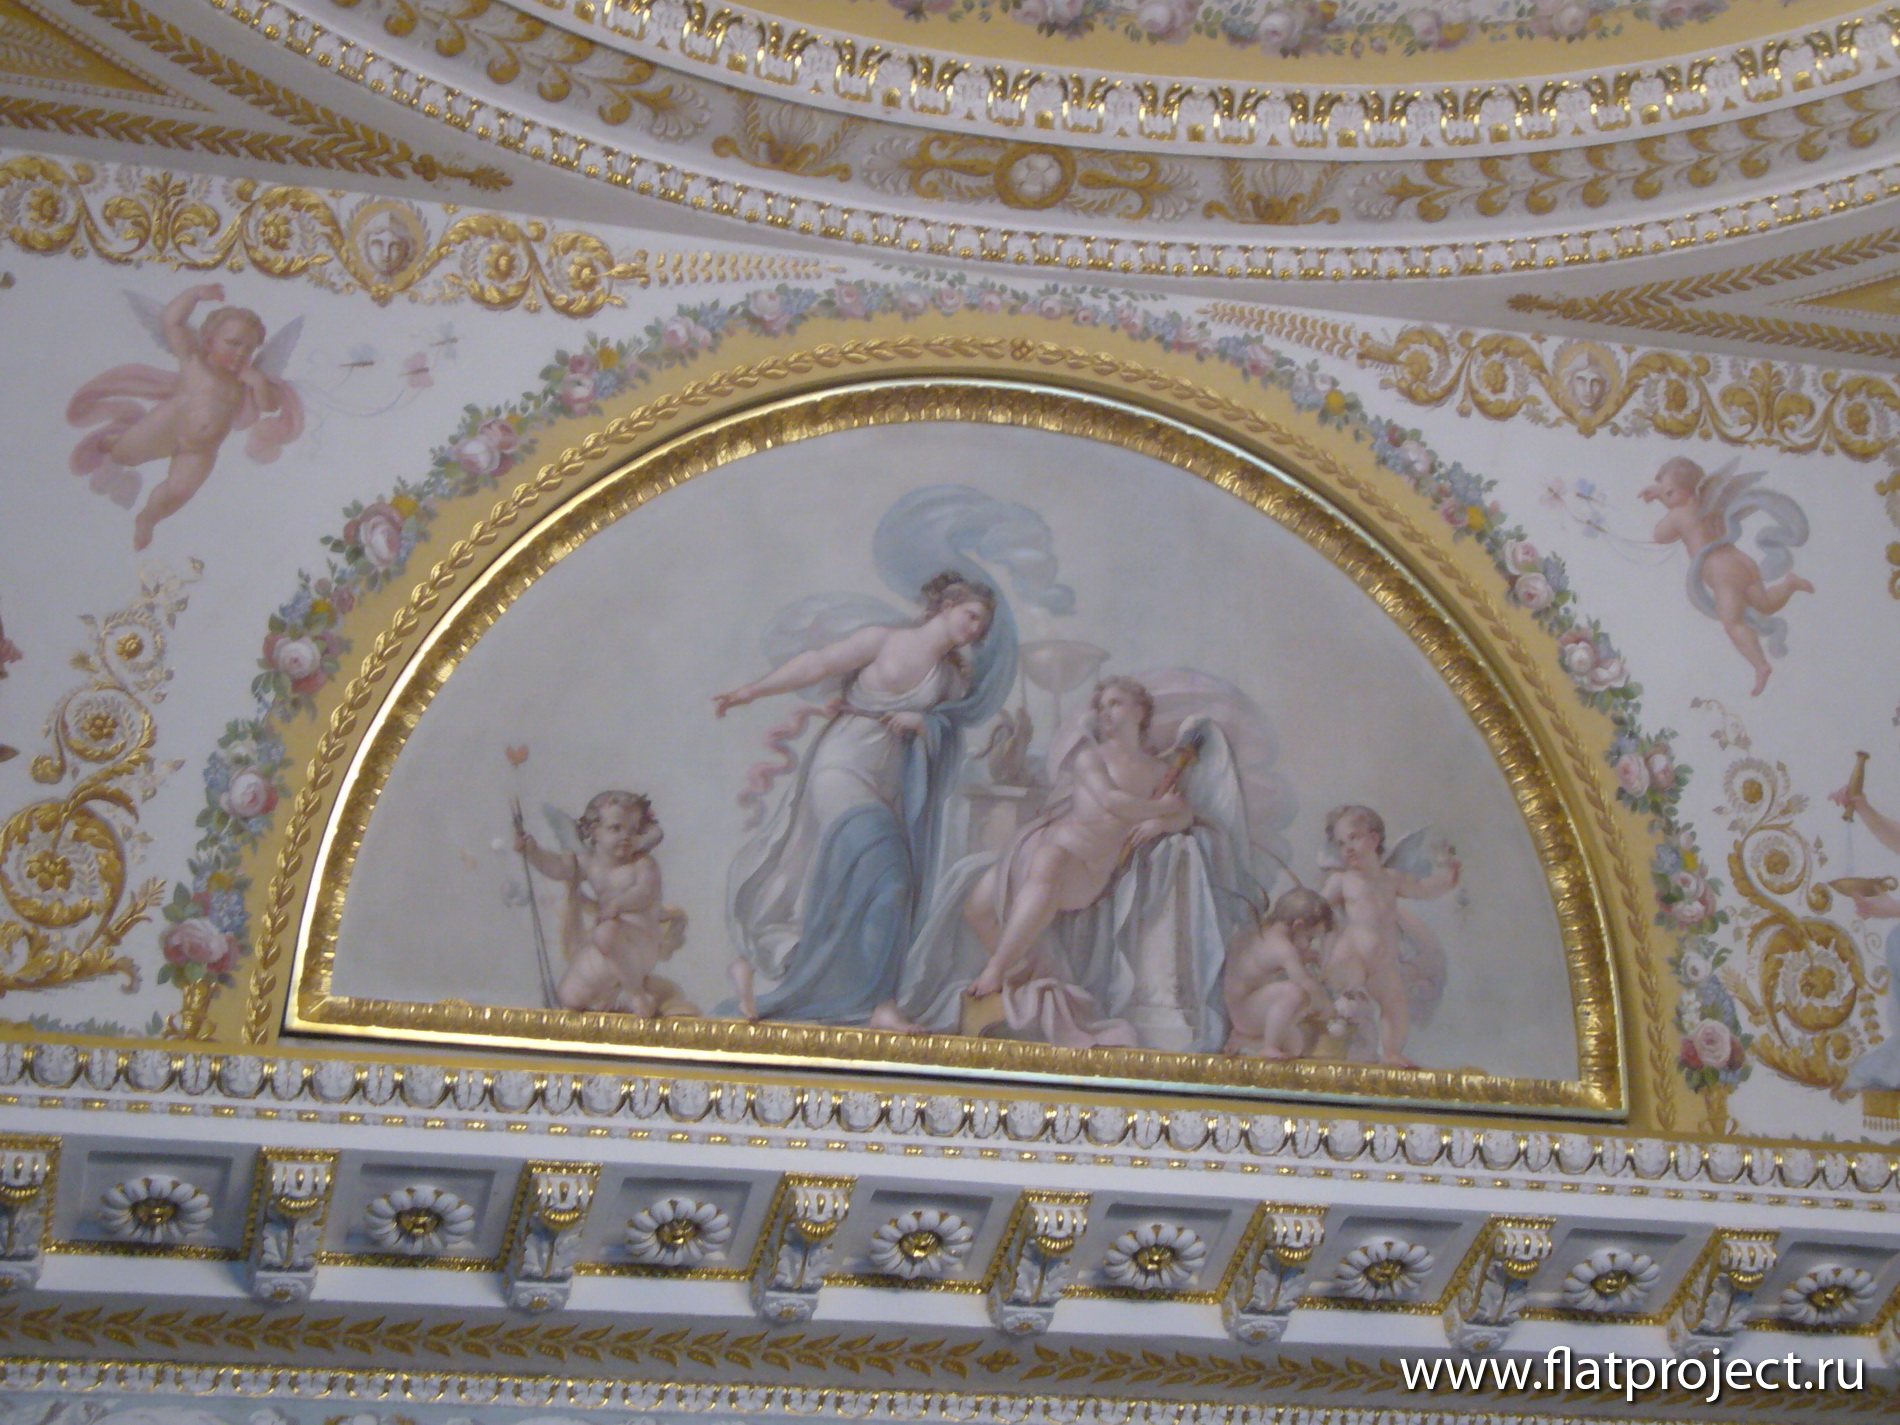 The State Russian museum interiors – photo 63